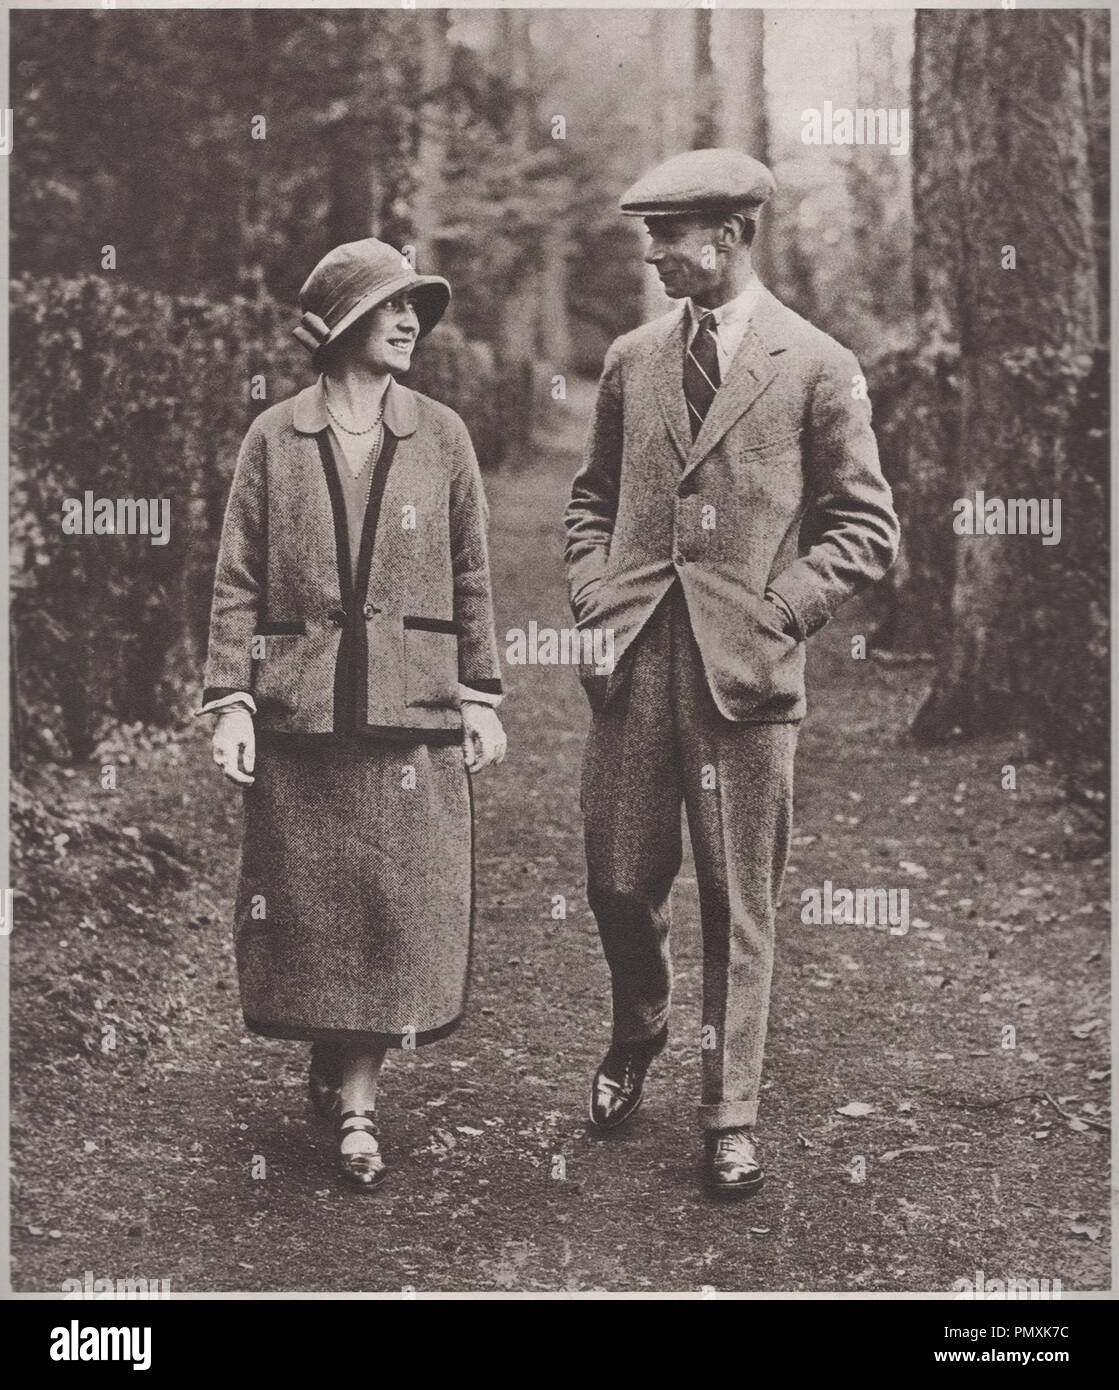 George the sixth with his wife Queen Elizabeth Bowes Lyon on their honeymoon in 1923 at Polesdon Lacey, Surrey they were married on the  26th April 1923 Stock Photo